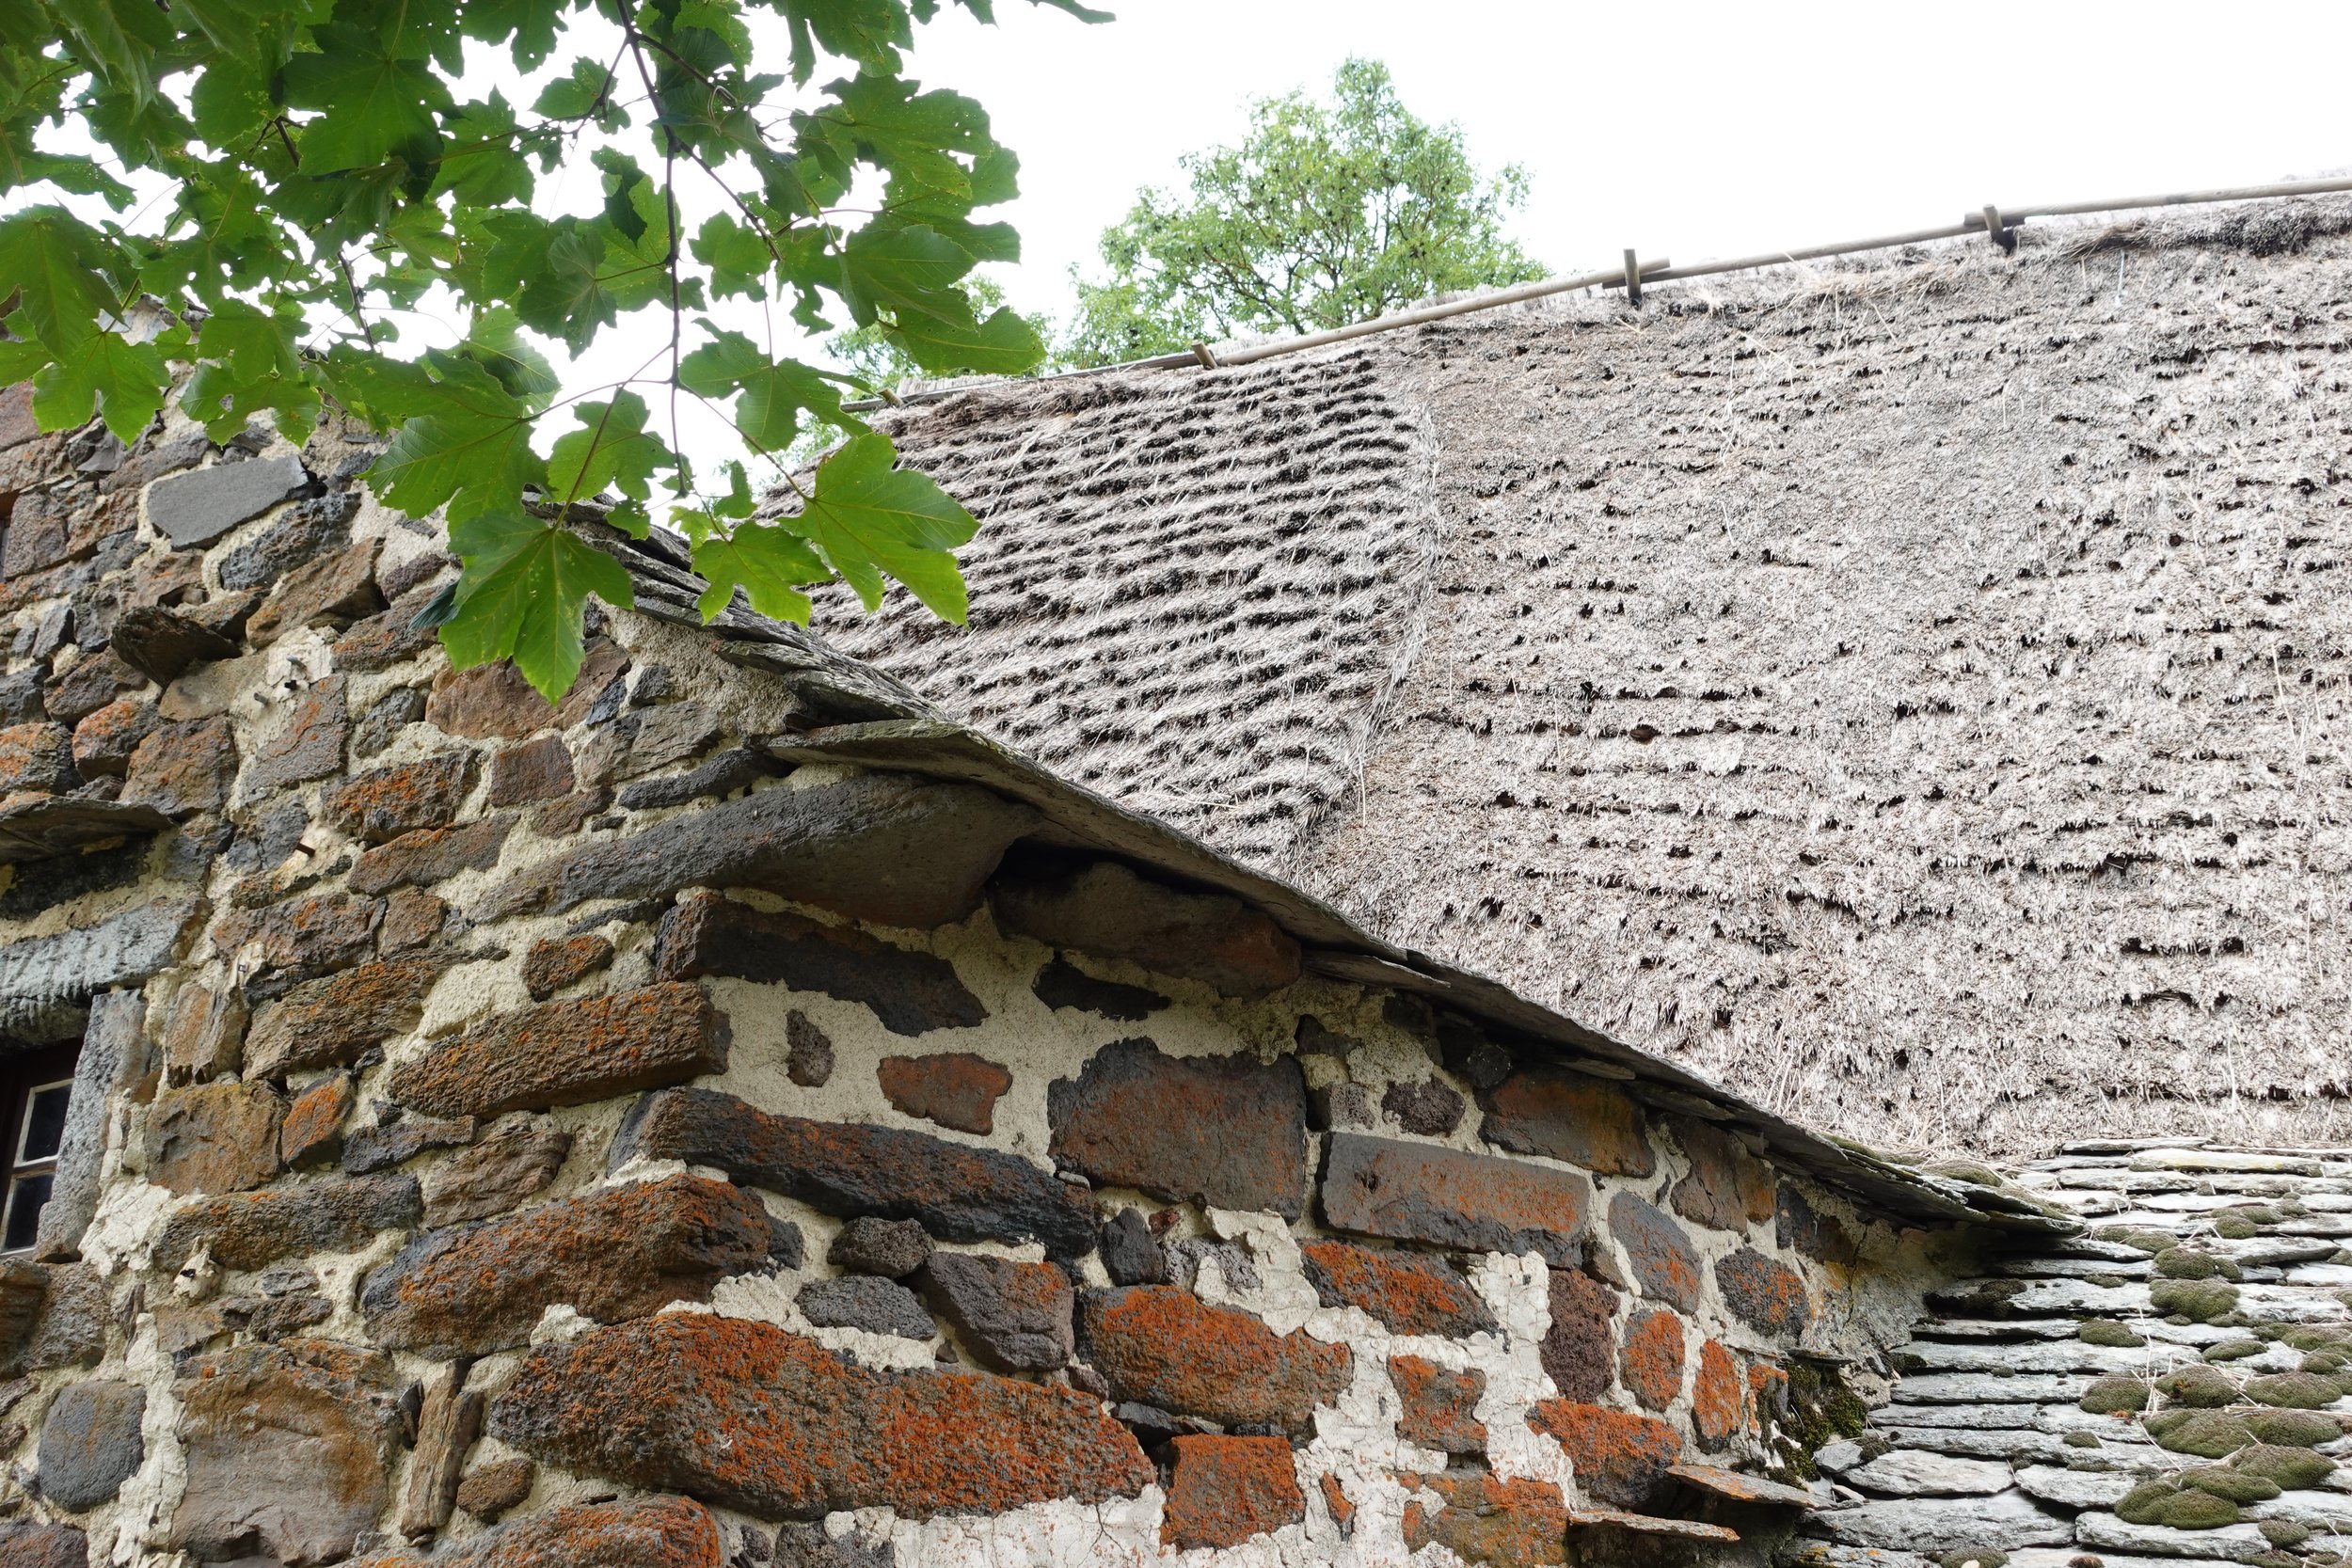 Close detail of artisanal thatched roof at Moudeyres Village